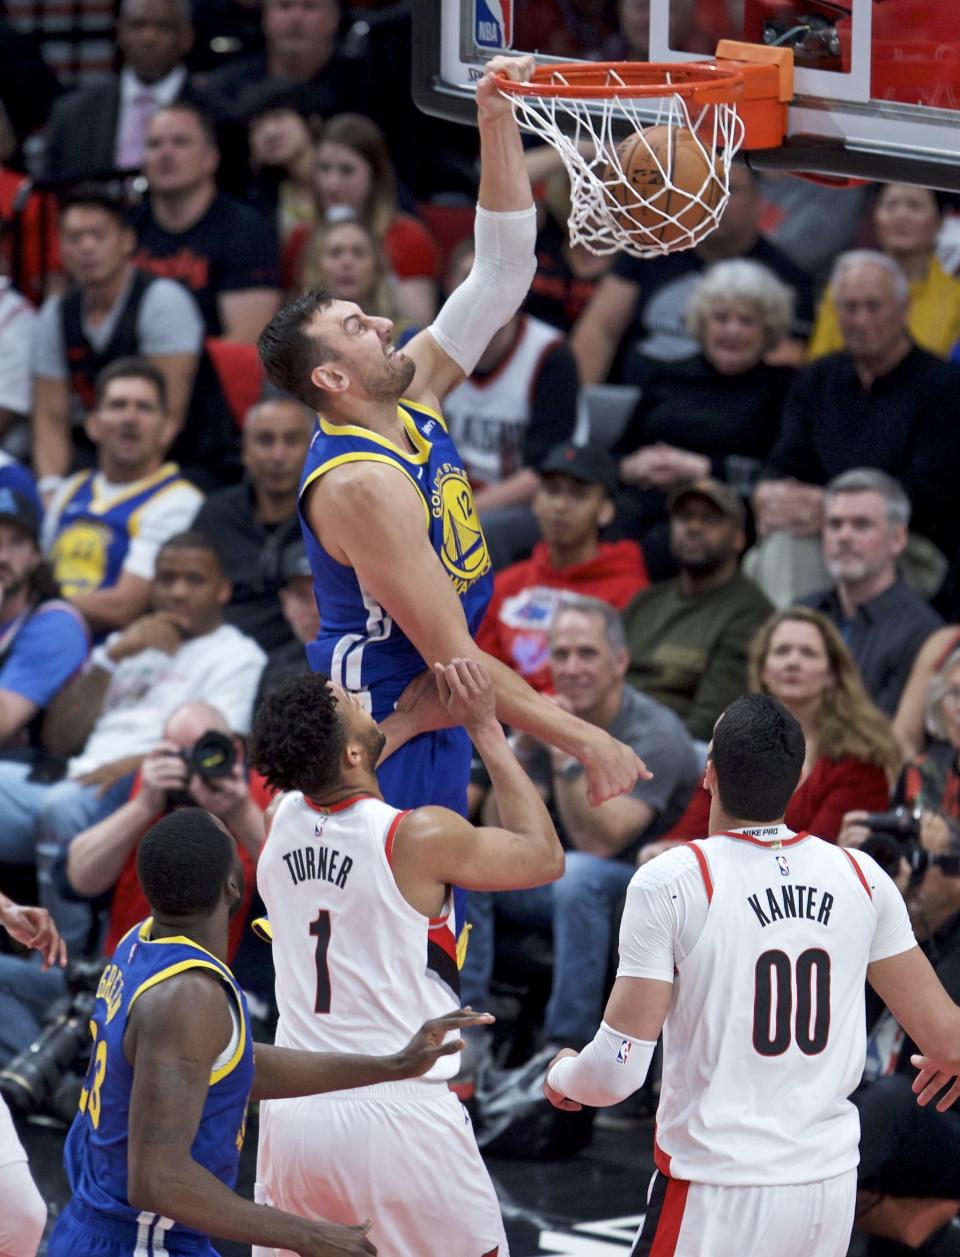 Golden State Warriors center Andrew Bogut, top, dunks over Portland Trail Blazers guard Evan Turner during the first half of Game 4 of the NBA basketball playoffs Western Conference finals Monday, May 20, 2019, in Portland, Ore. (AP Photo/Craig Mitchelldyer)